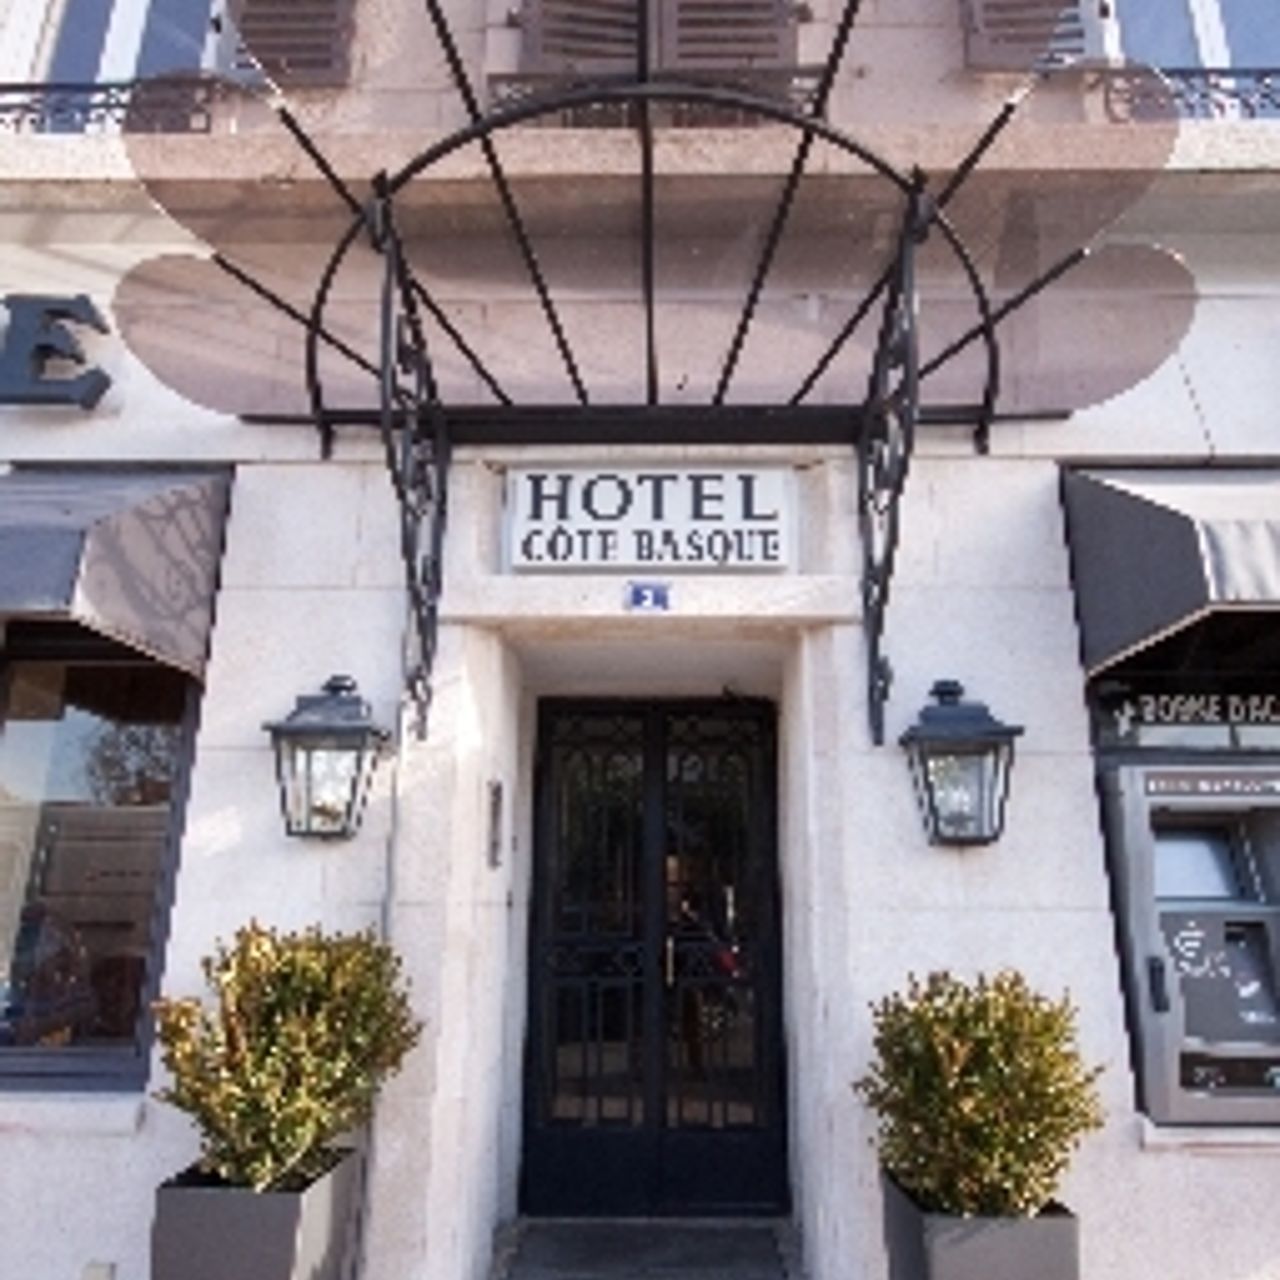 Hotel Côte Basque - Bayonne - Great prices at HOTEL INFO